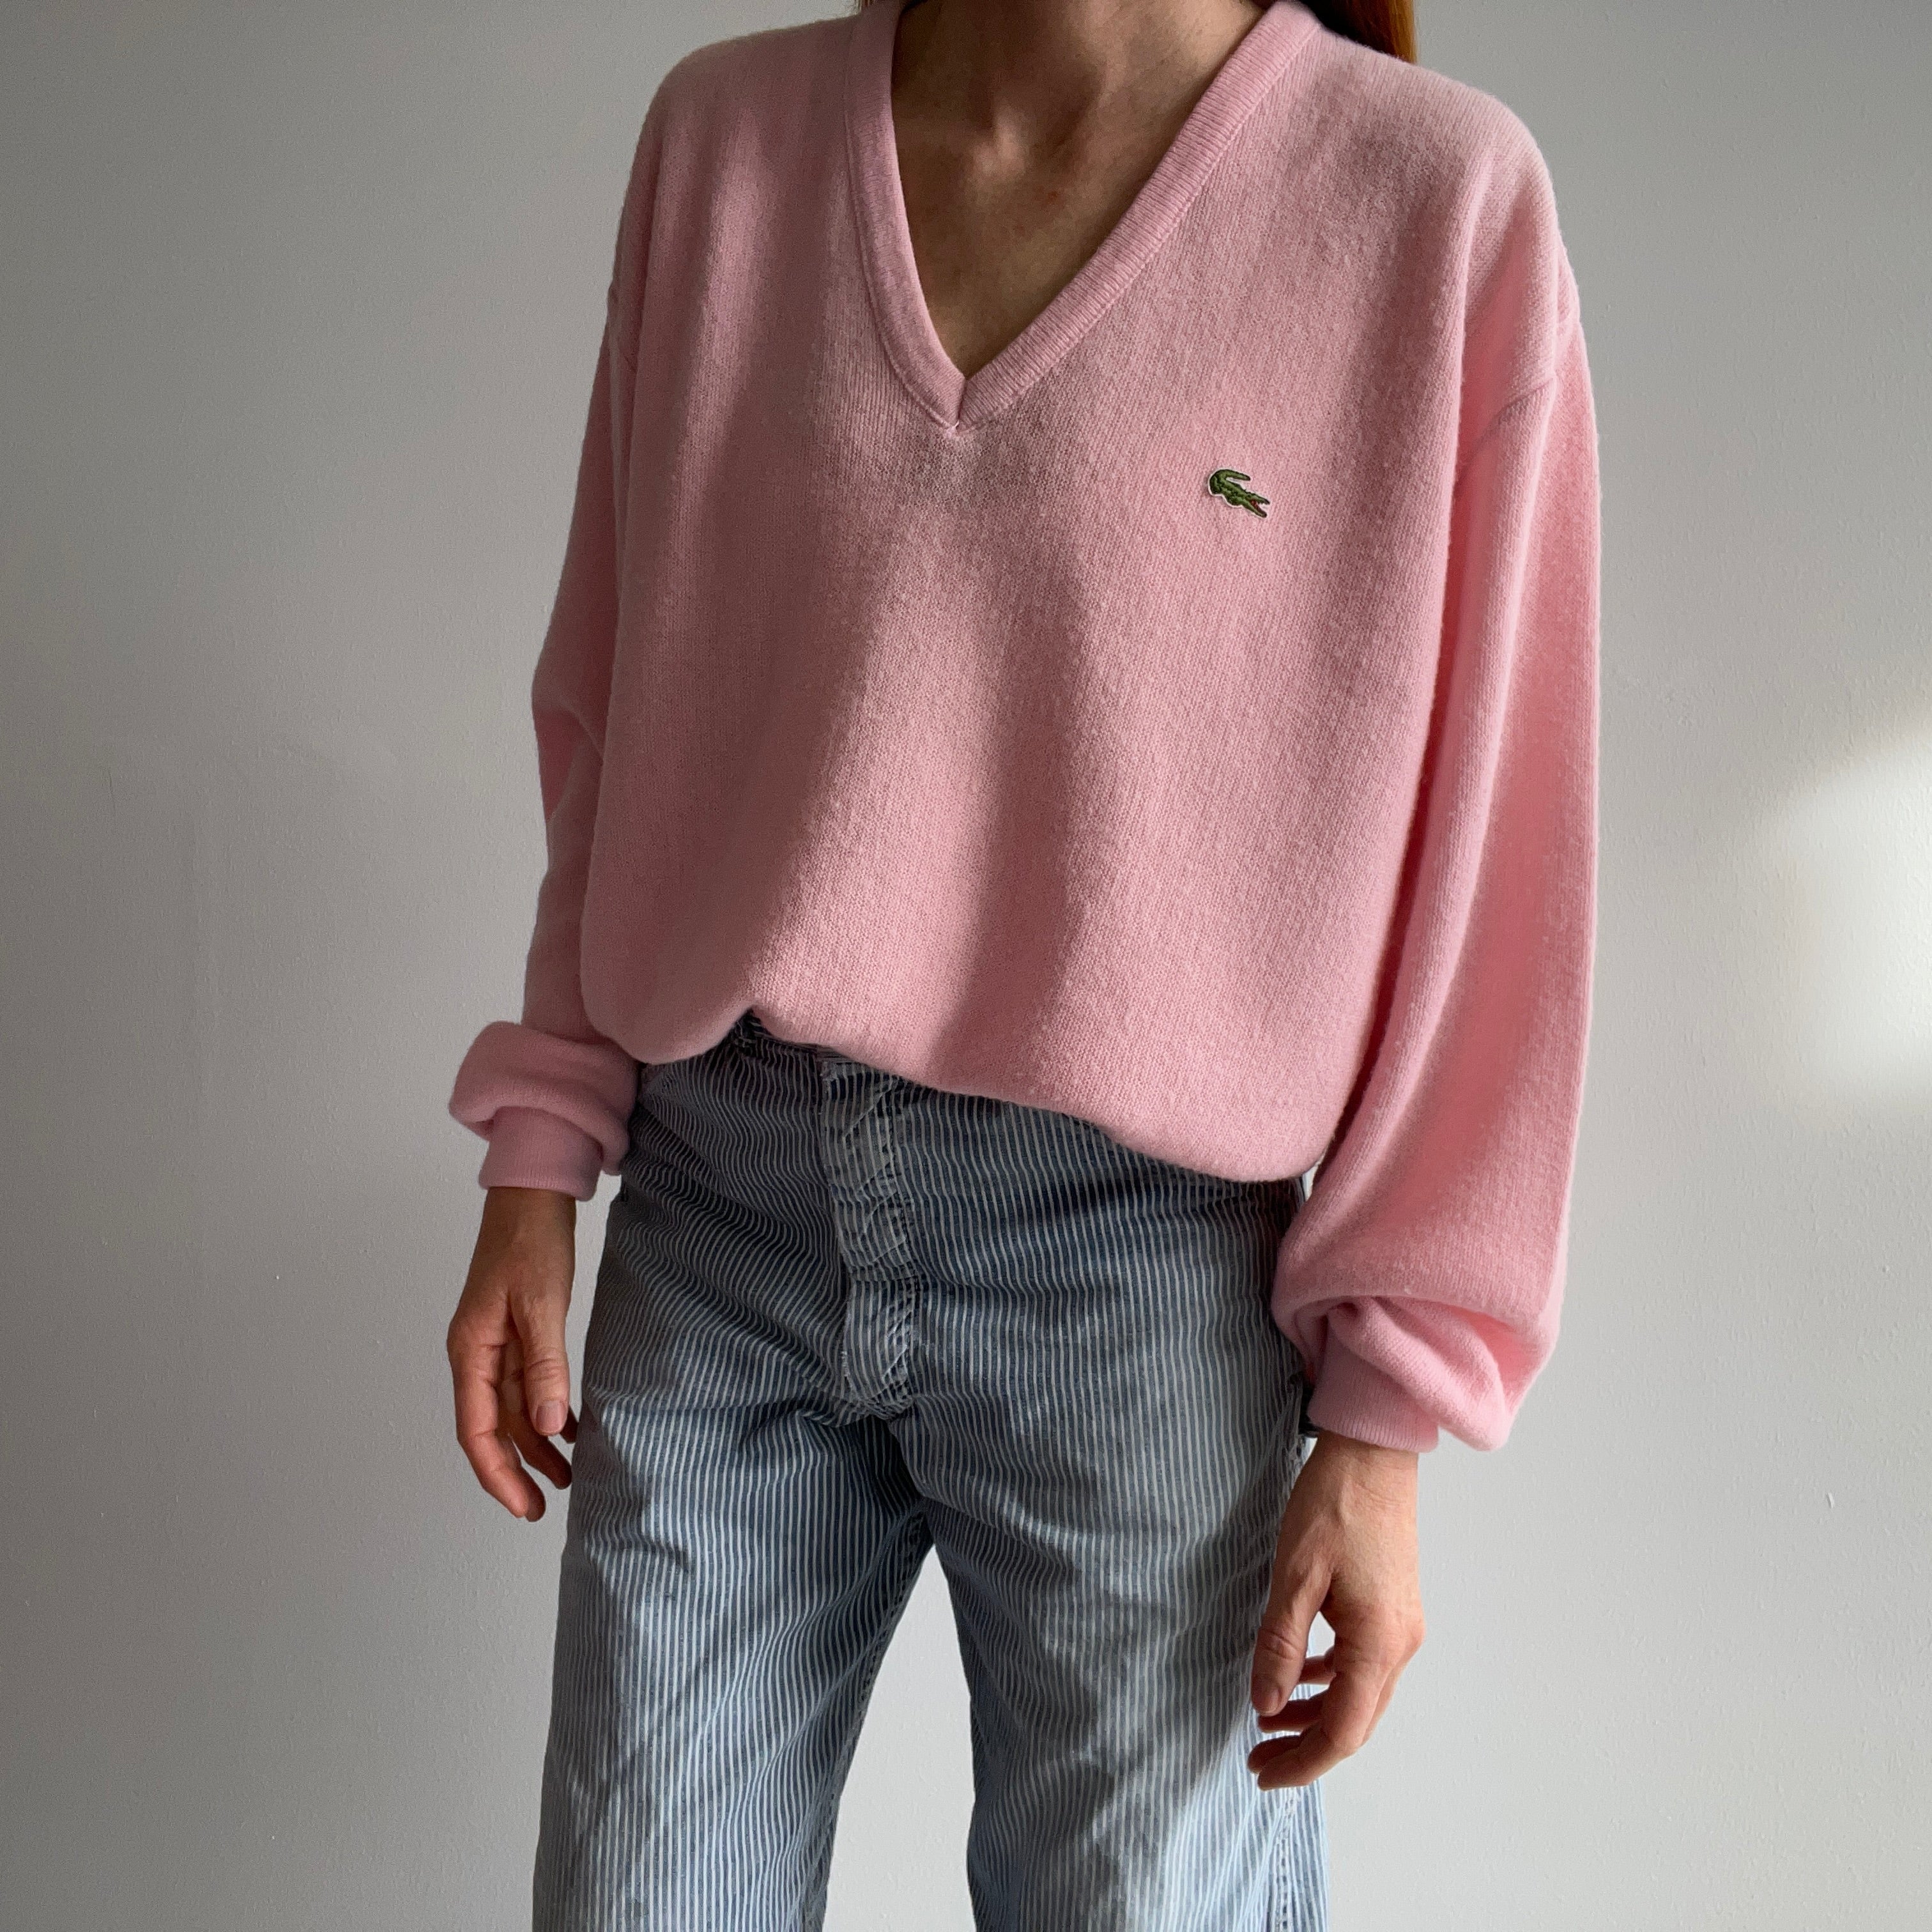 1970/80s Lacoste Pale Pink V-Neck Sweater